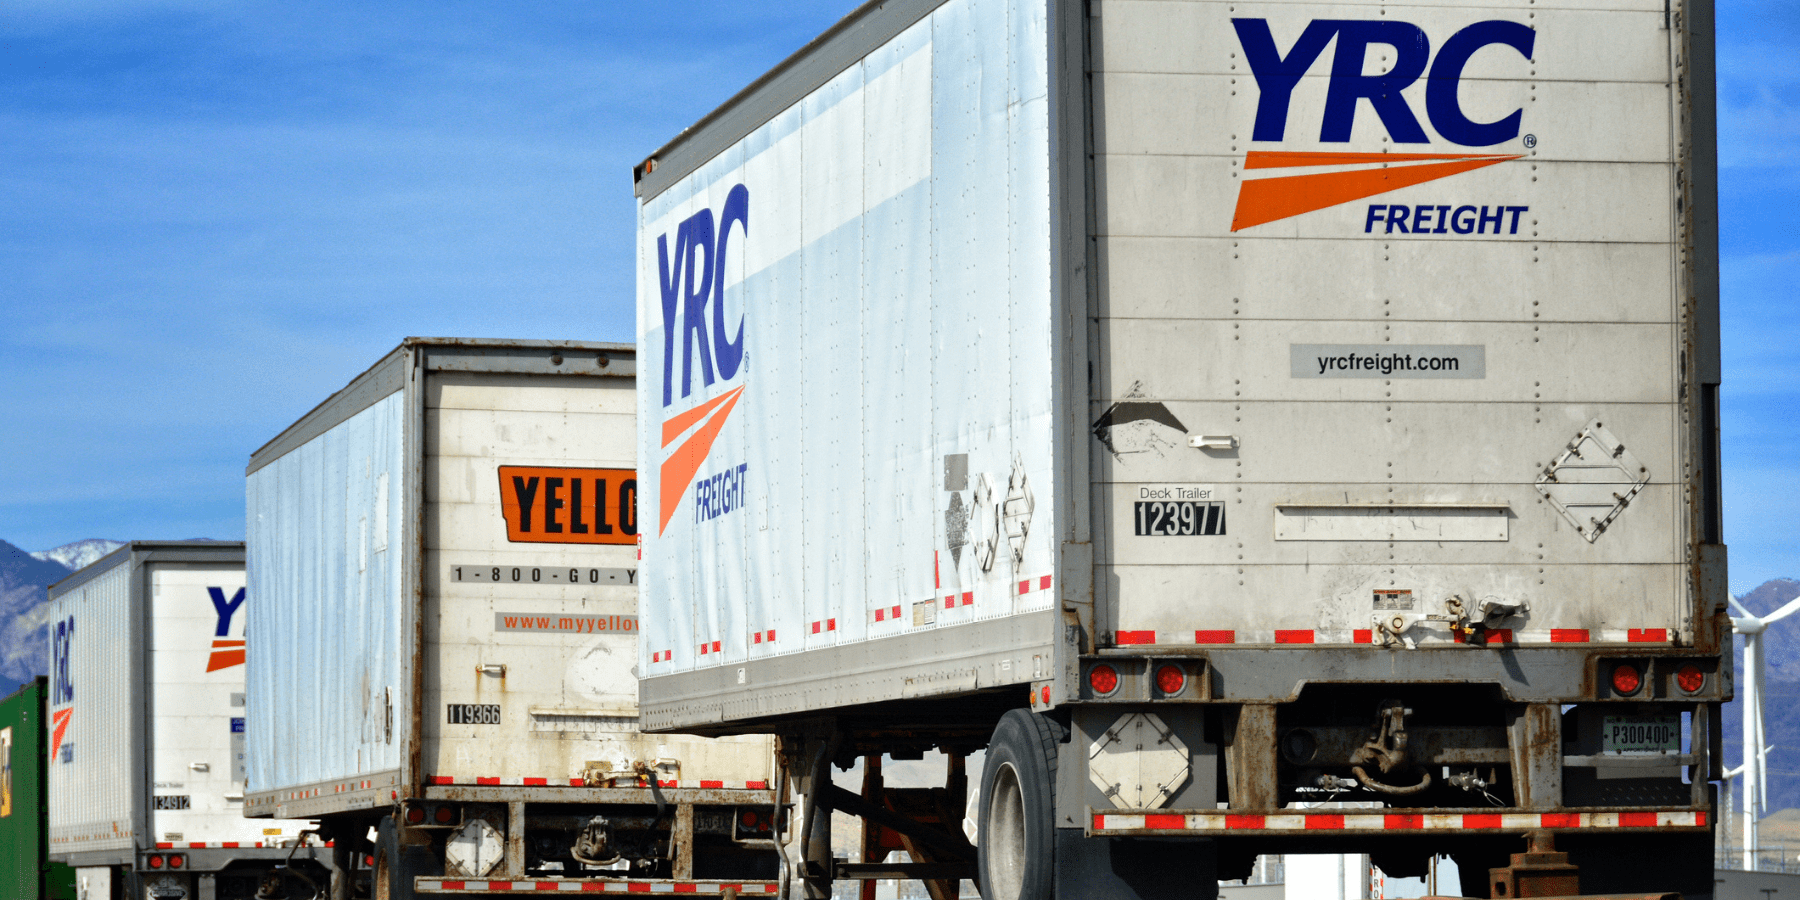 YRC containers without tractors to carry them